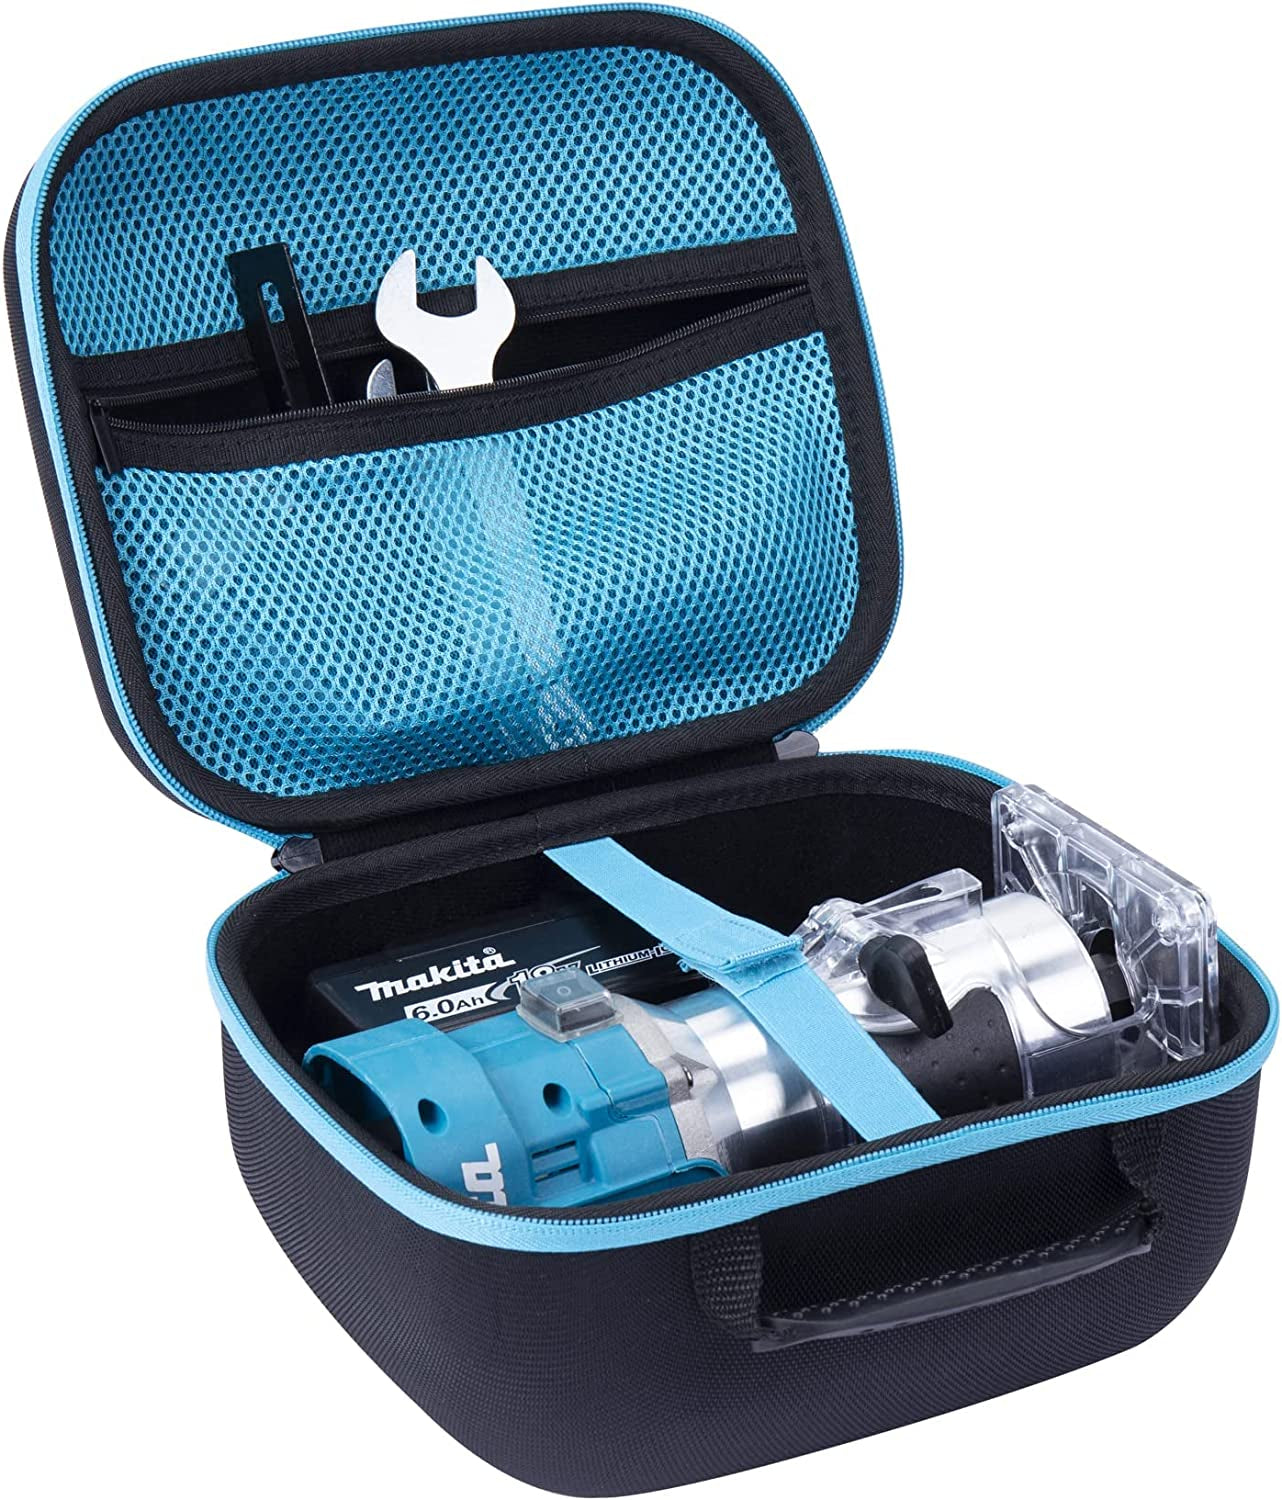 Khanka Hard Case Replacement for Makita XTR01Z 18V LXT Lithium-Ion Brushless Cordless Compact Router, Case Only